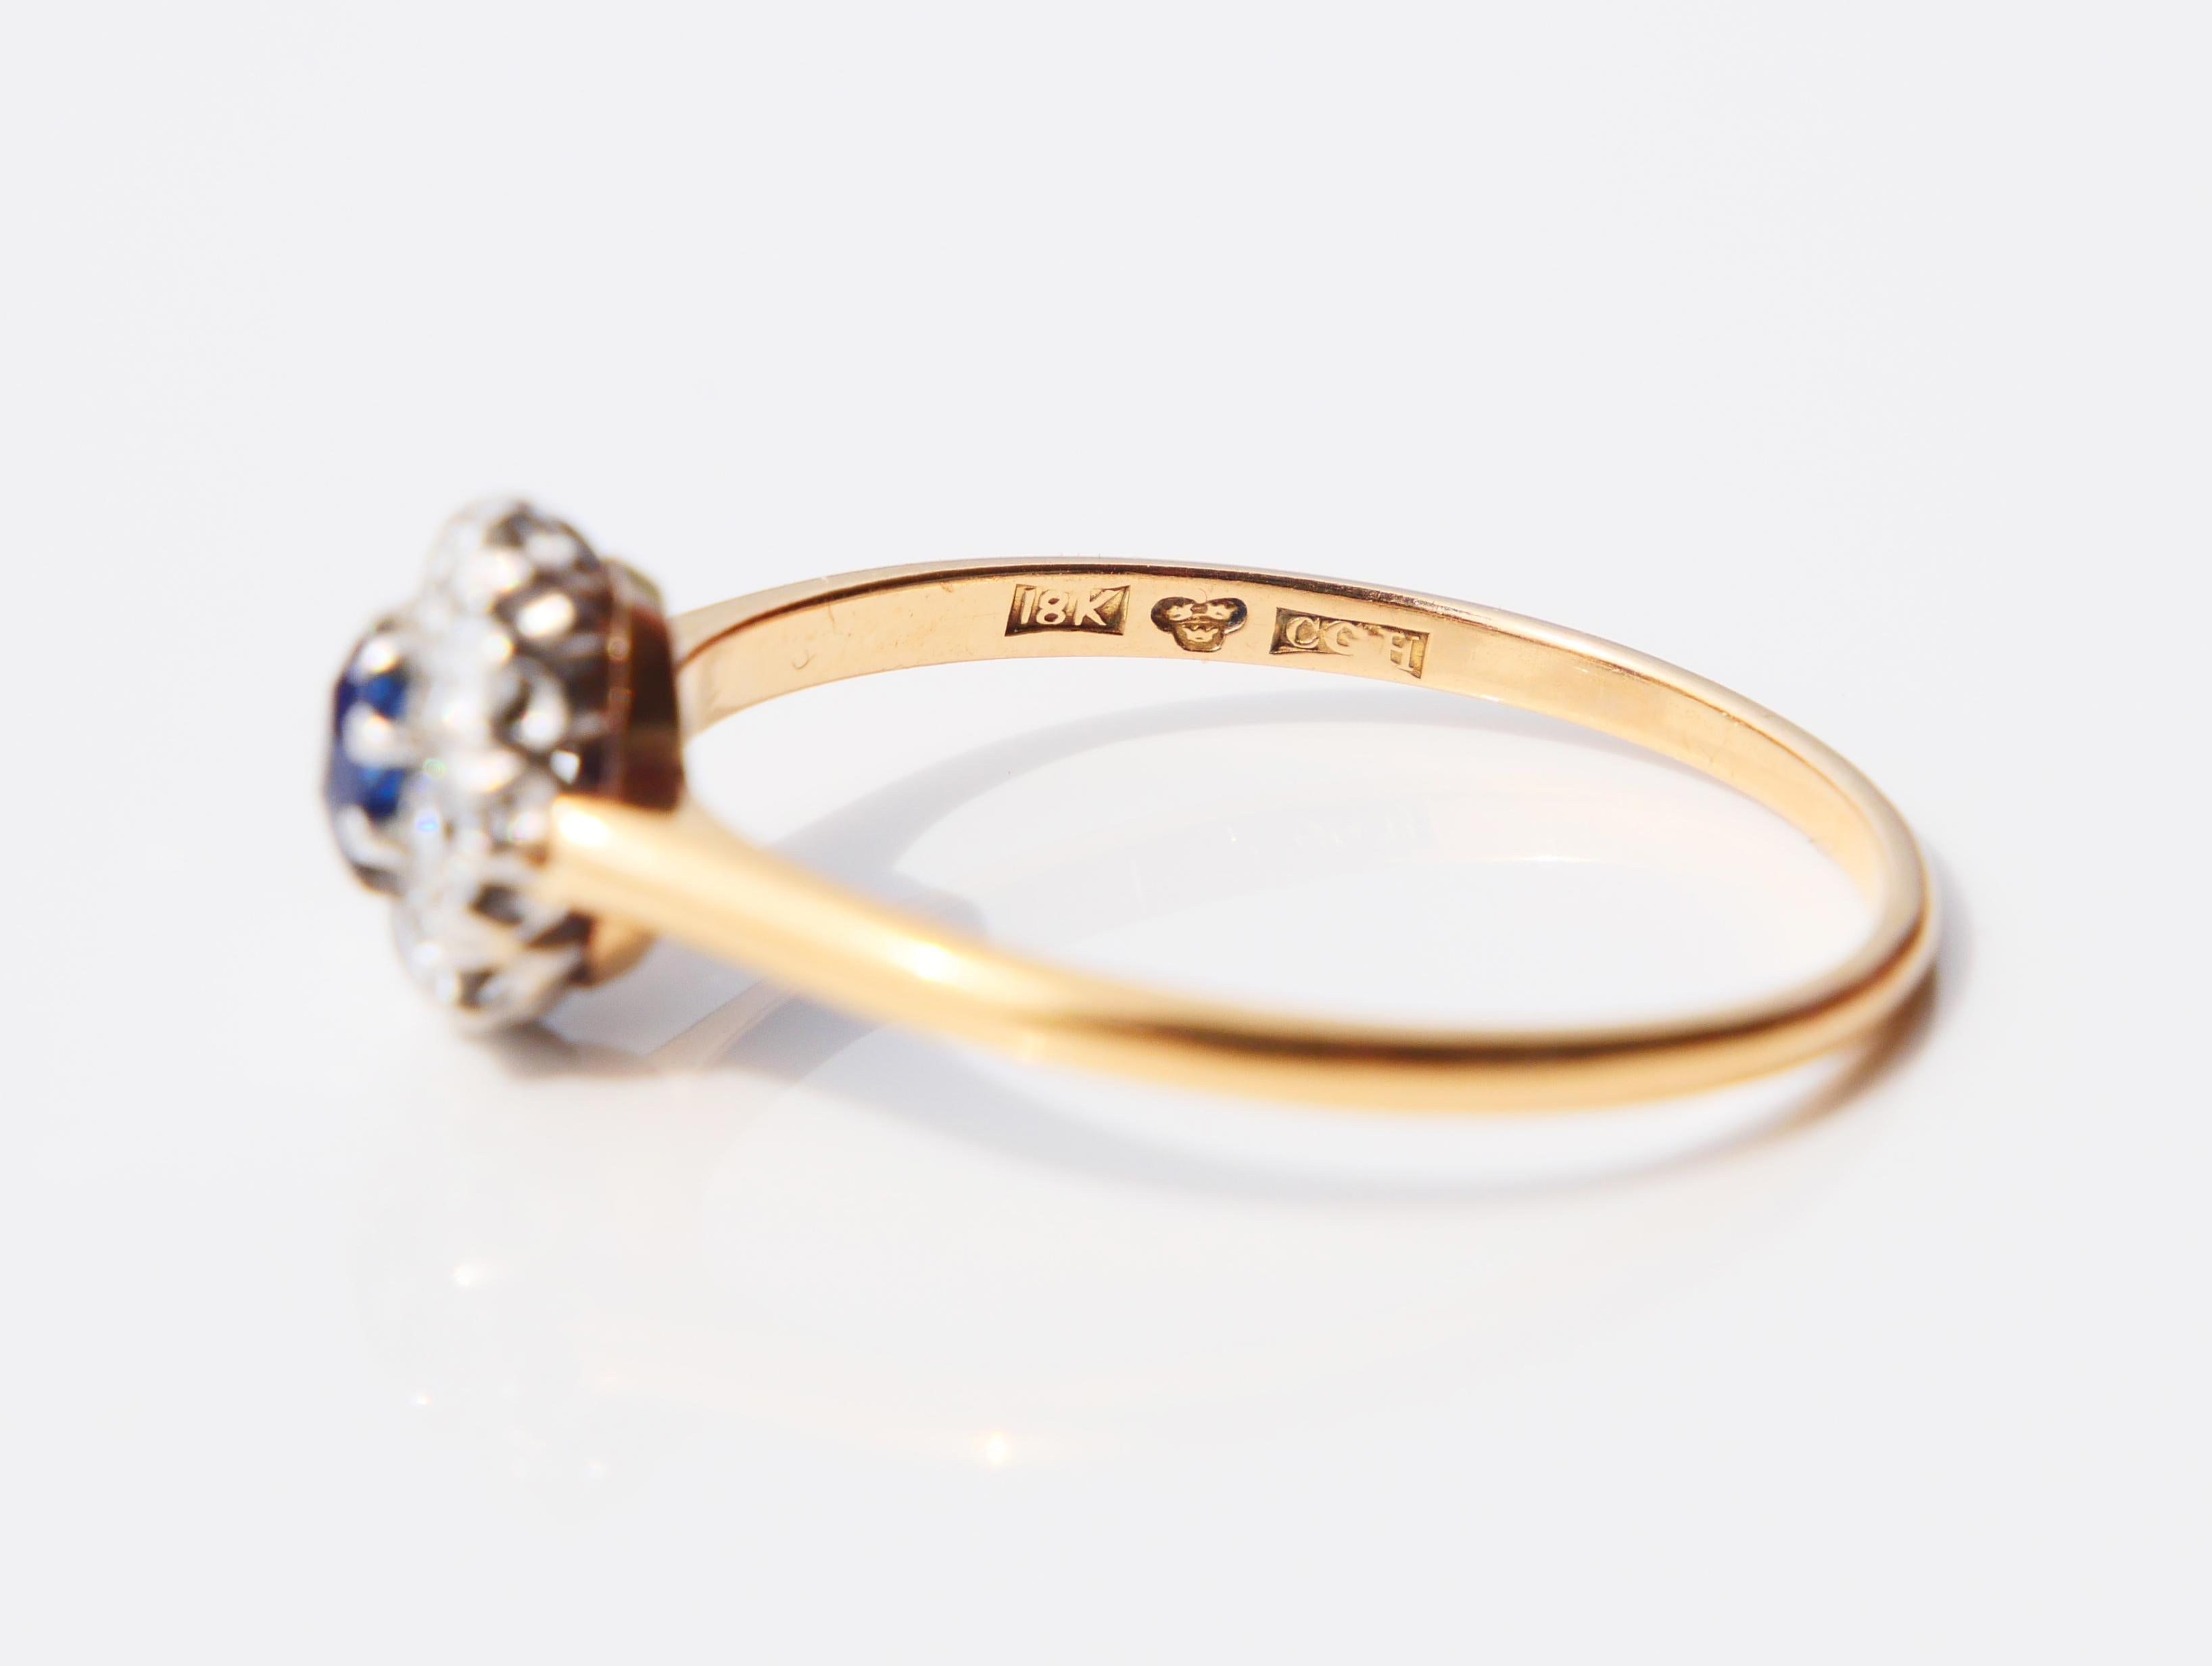 1916 Nordic Halo Ring 0.25 ct Sapphire Diamonds solid 18K Gold Ø 8.25 US /2.5gr 5